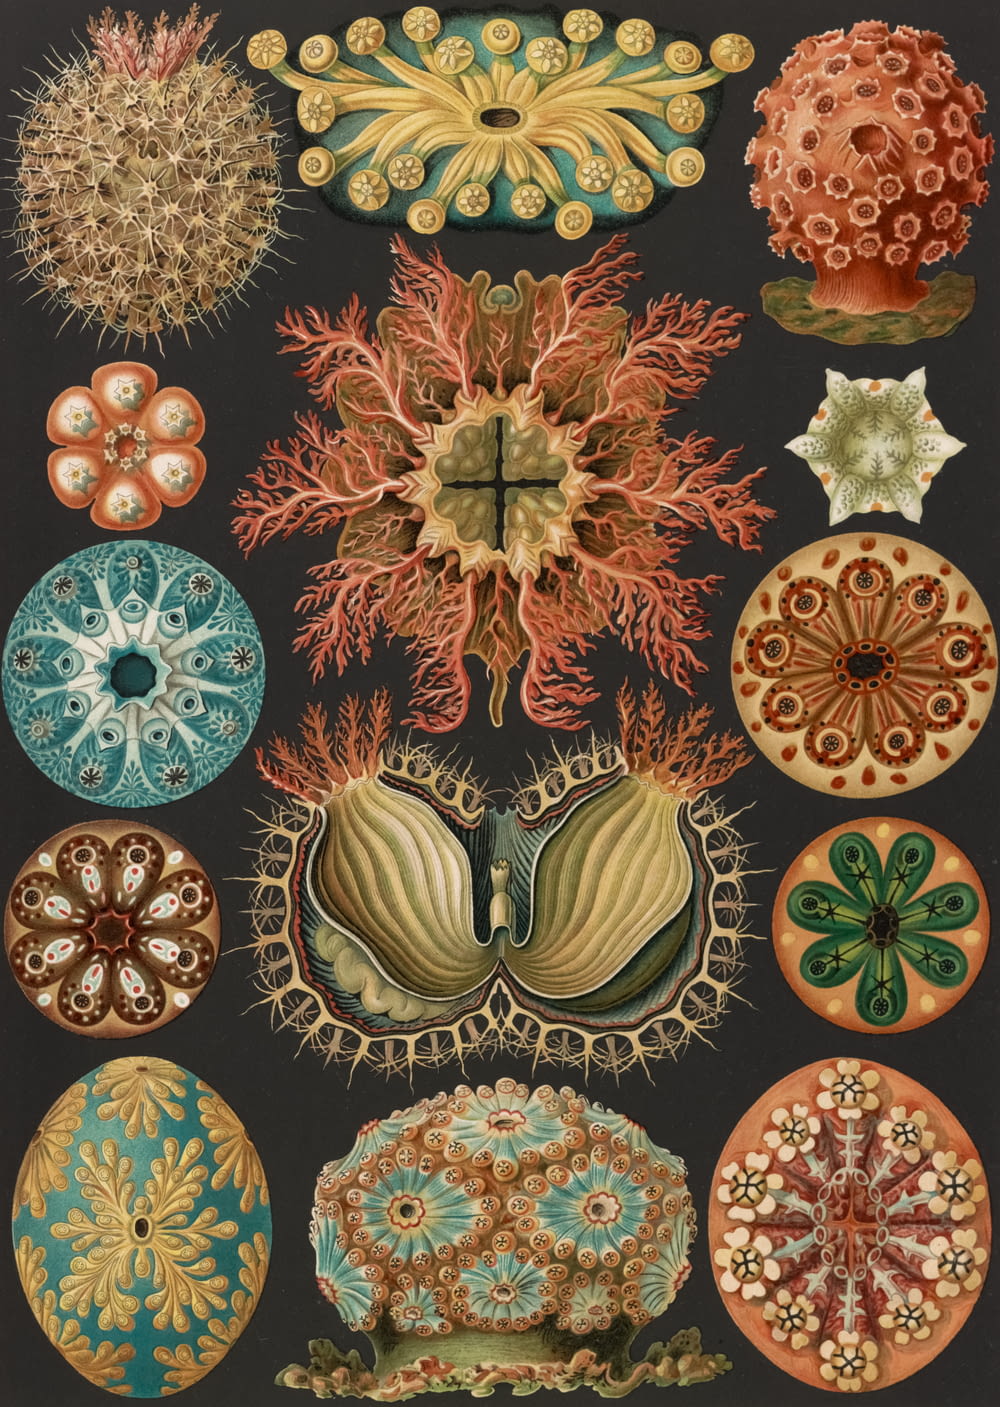 Ascidiae. - Seescheiden. Illustration showing a variety of sea squirts.